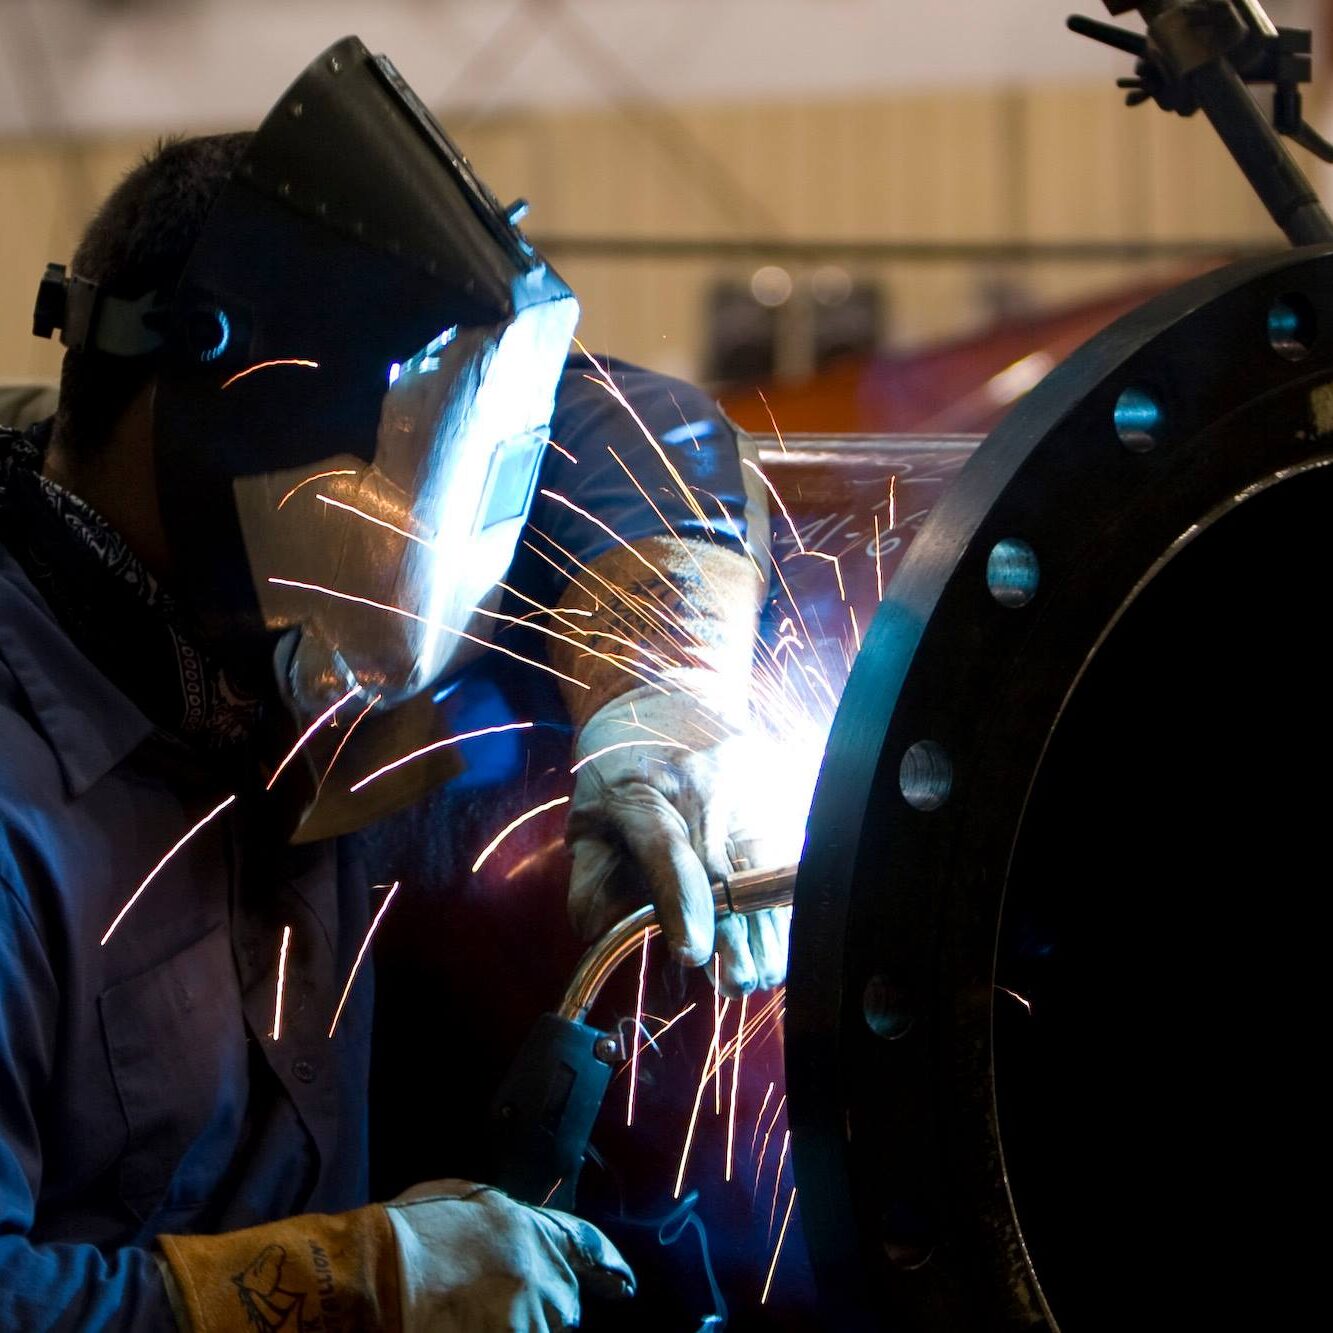 A welder working on a trade project